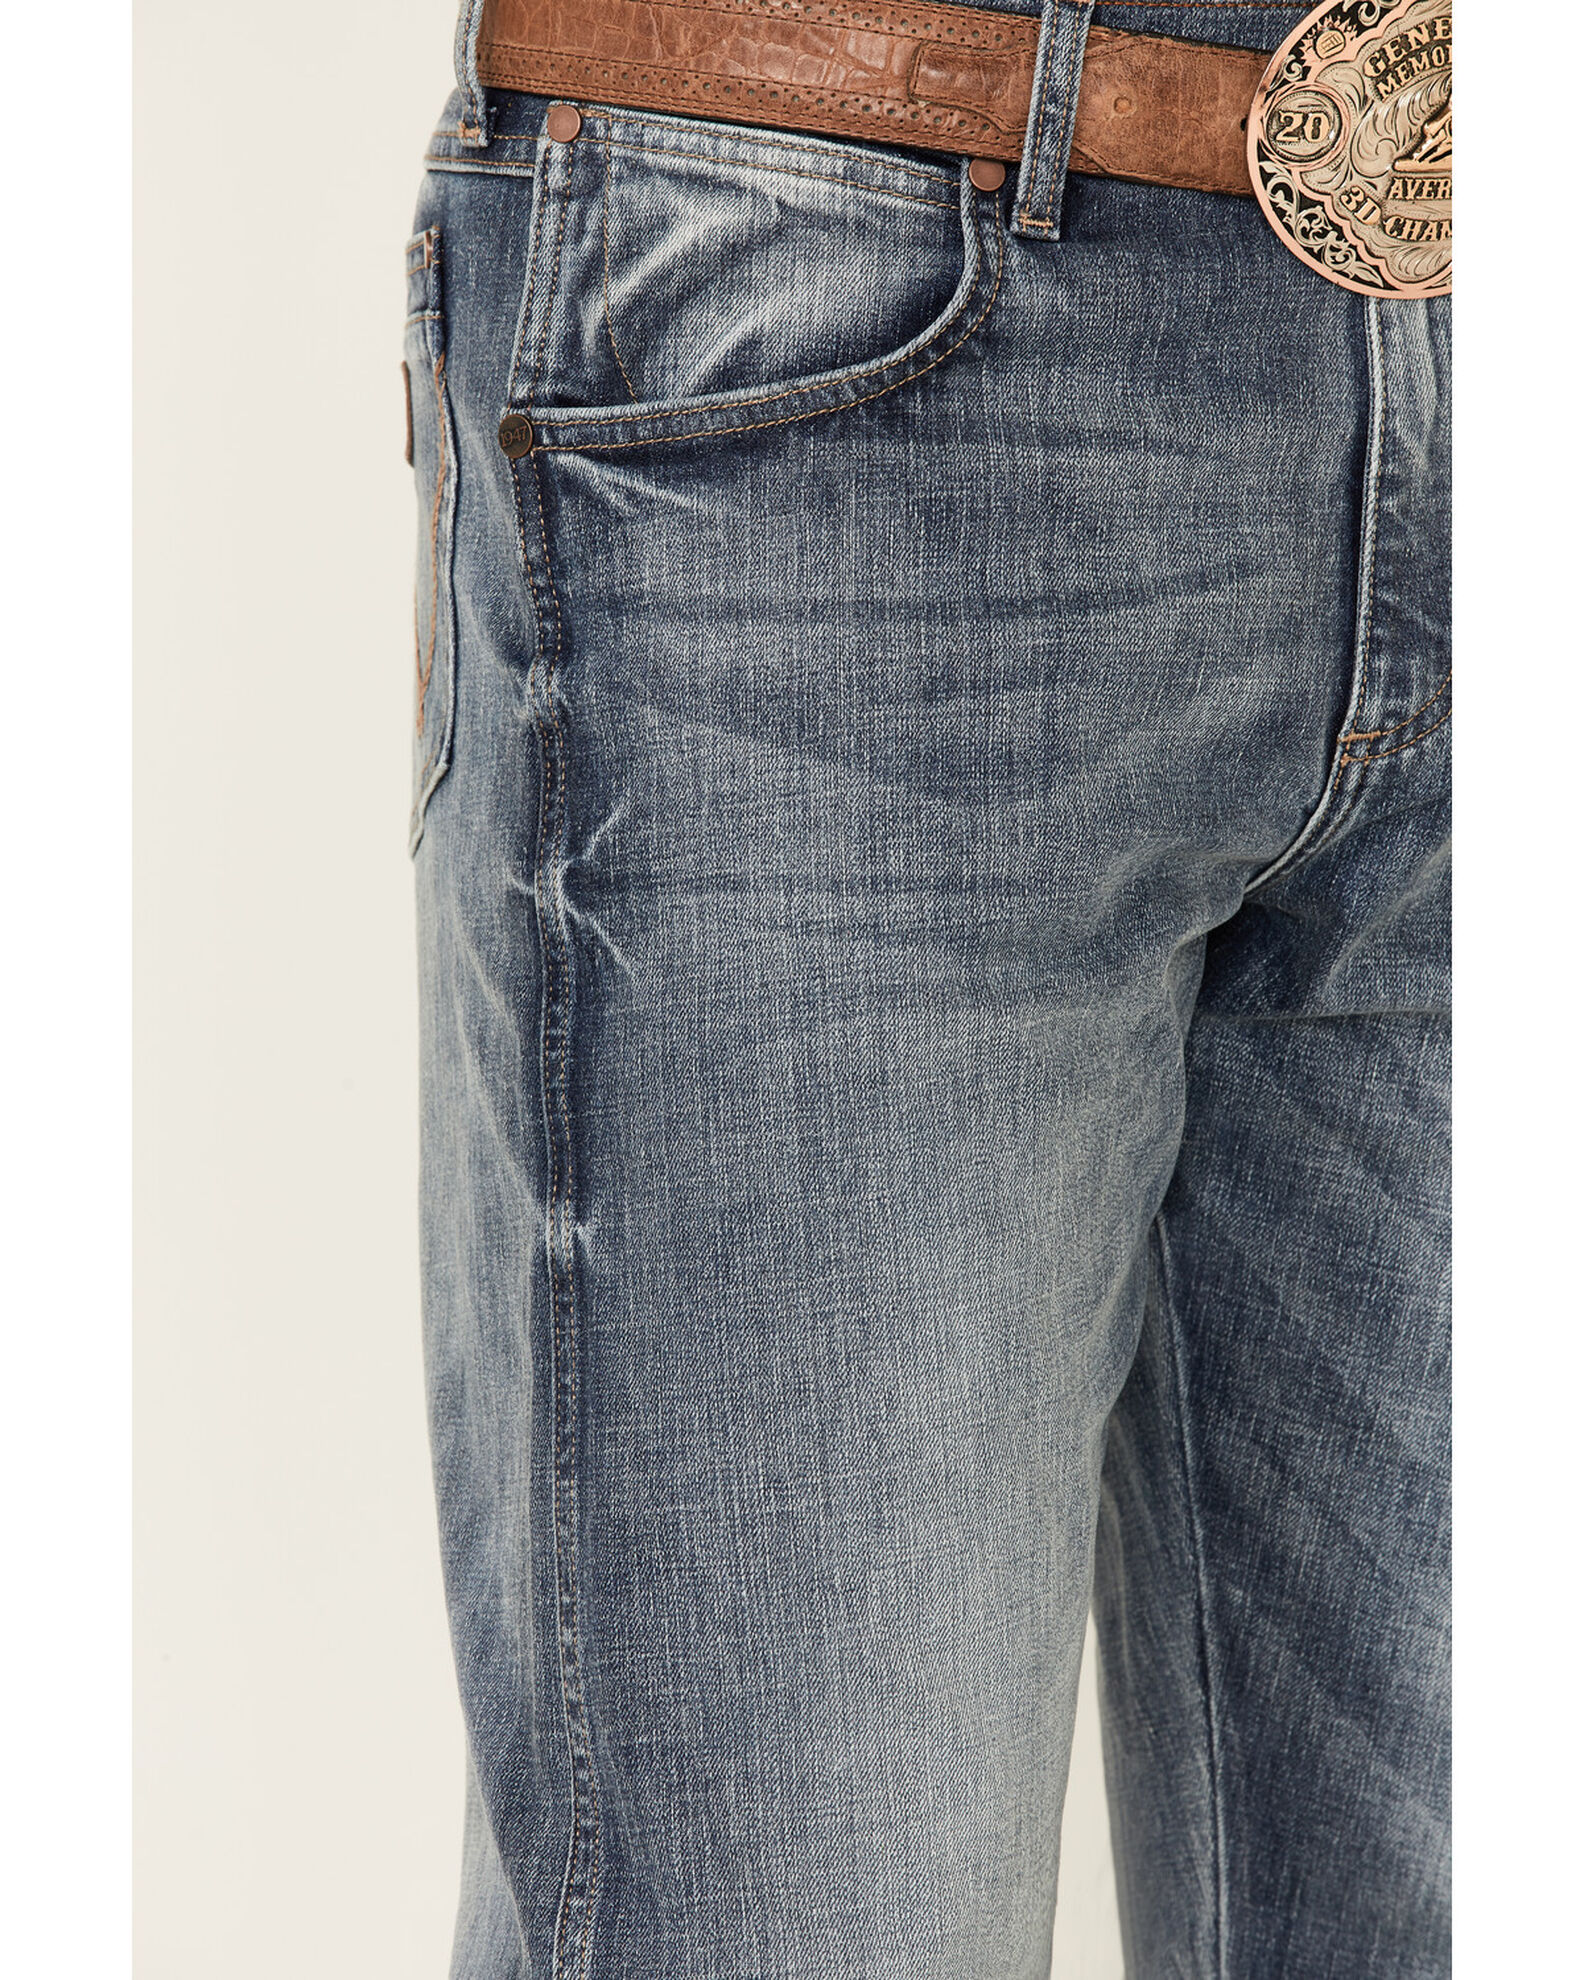 Product Name: Wrangler Retro Men's Greeley Light Wash Stretch Relaxed ...